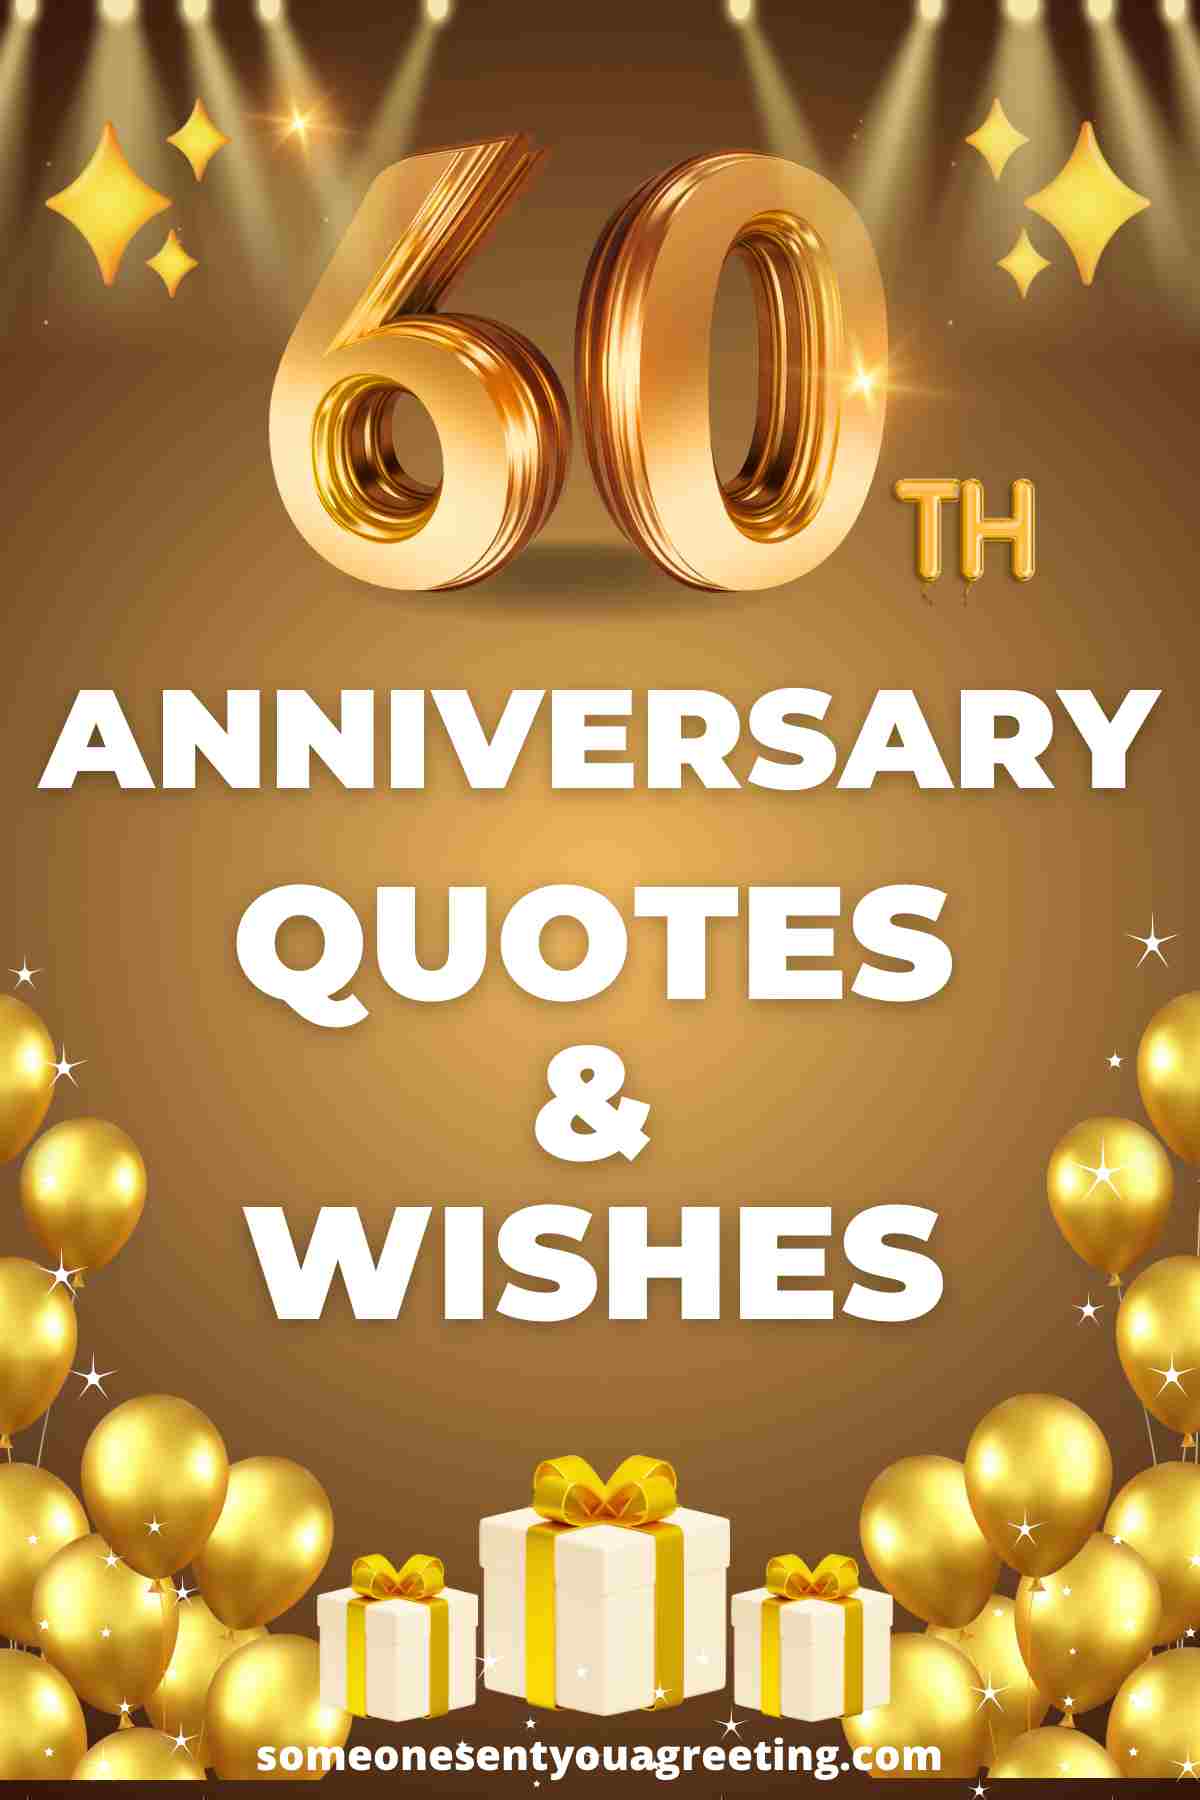 60th anniversary quotes